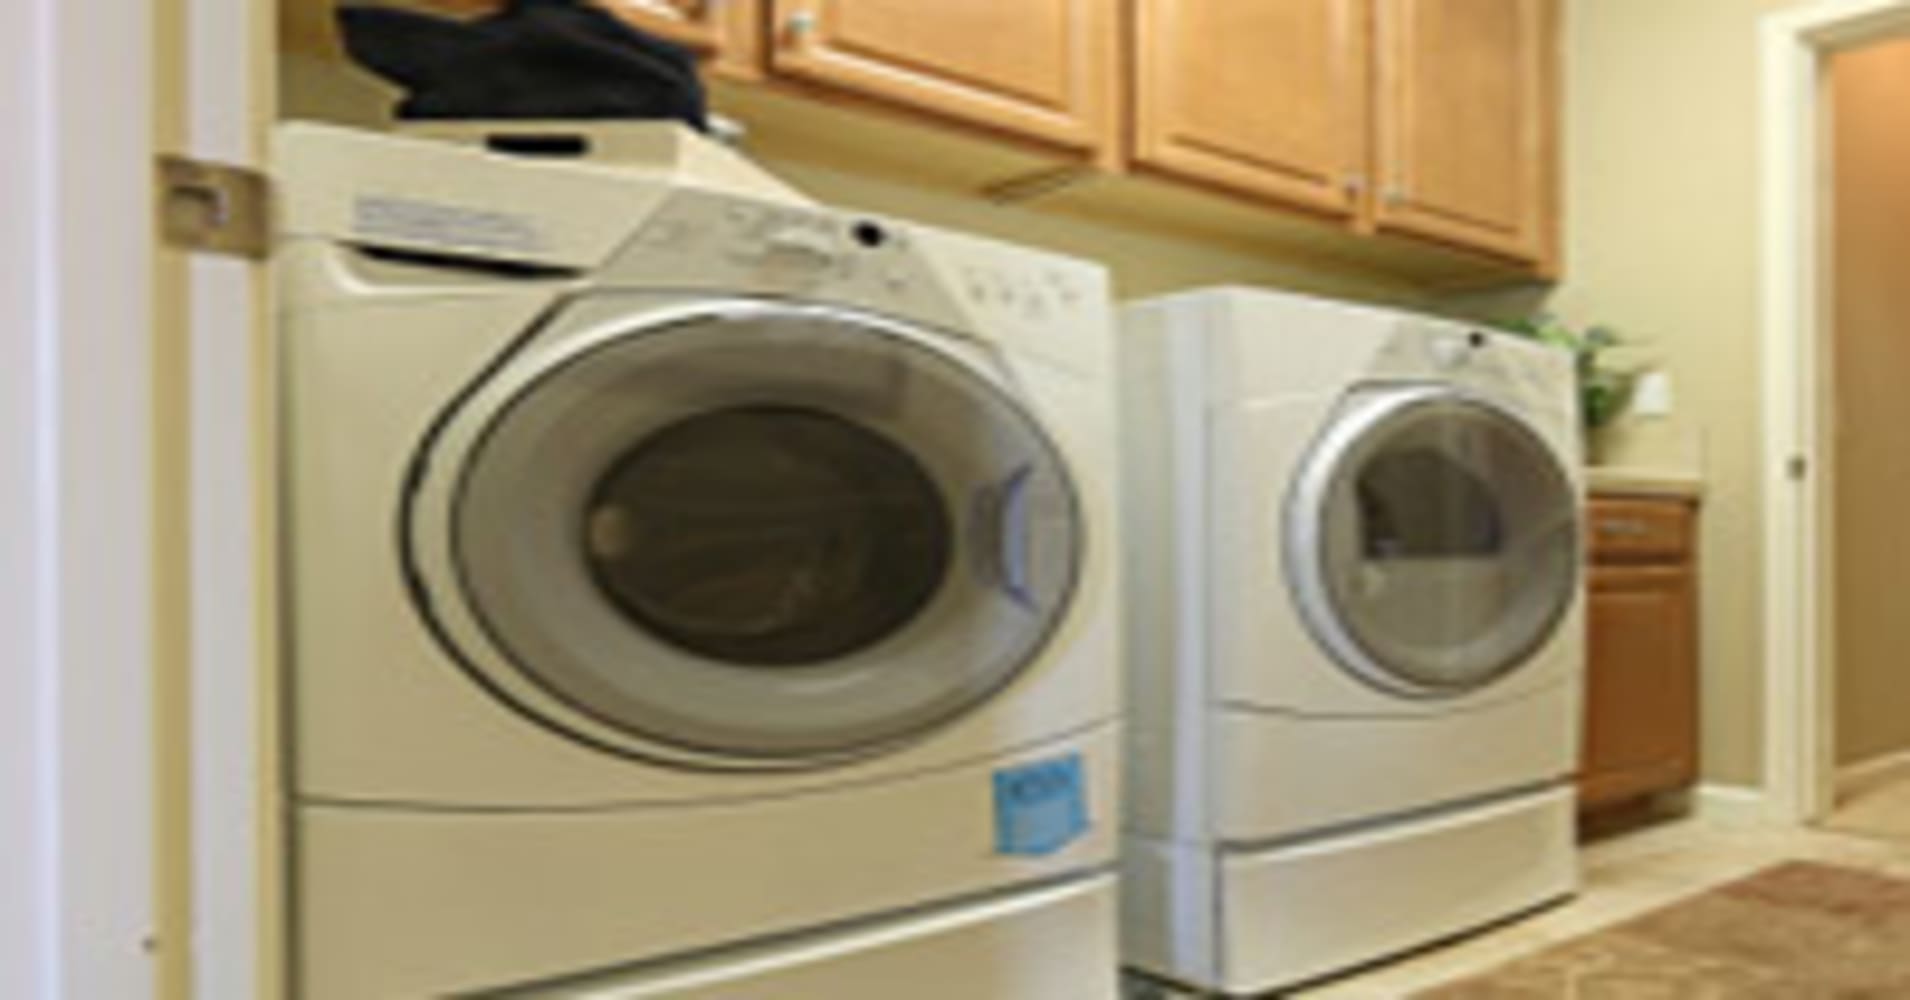 dollars-for-dishwashers-appliance-rebates-on-the-way